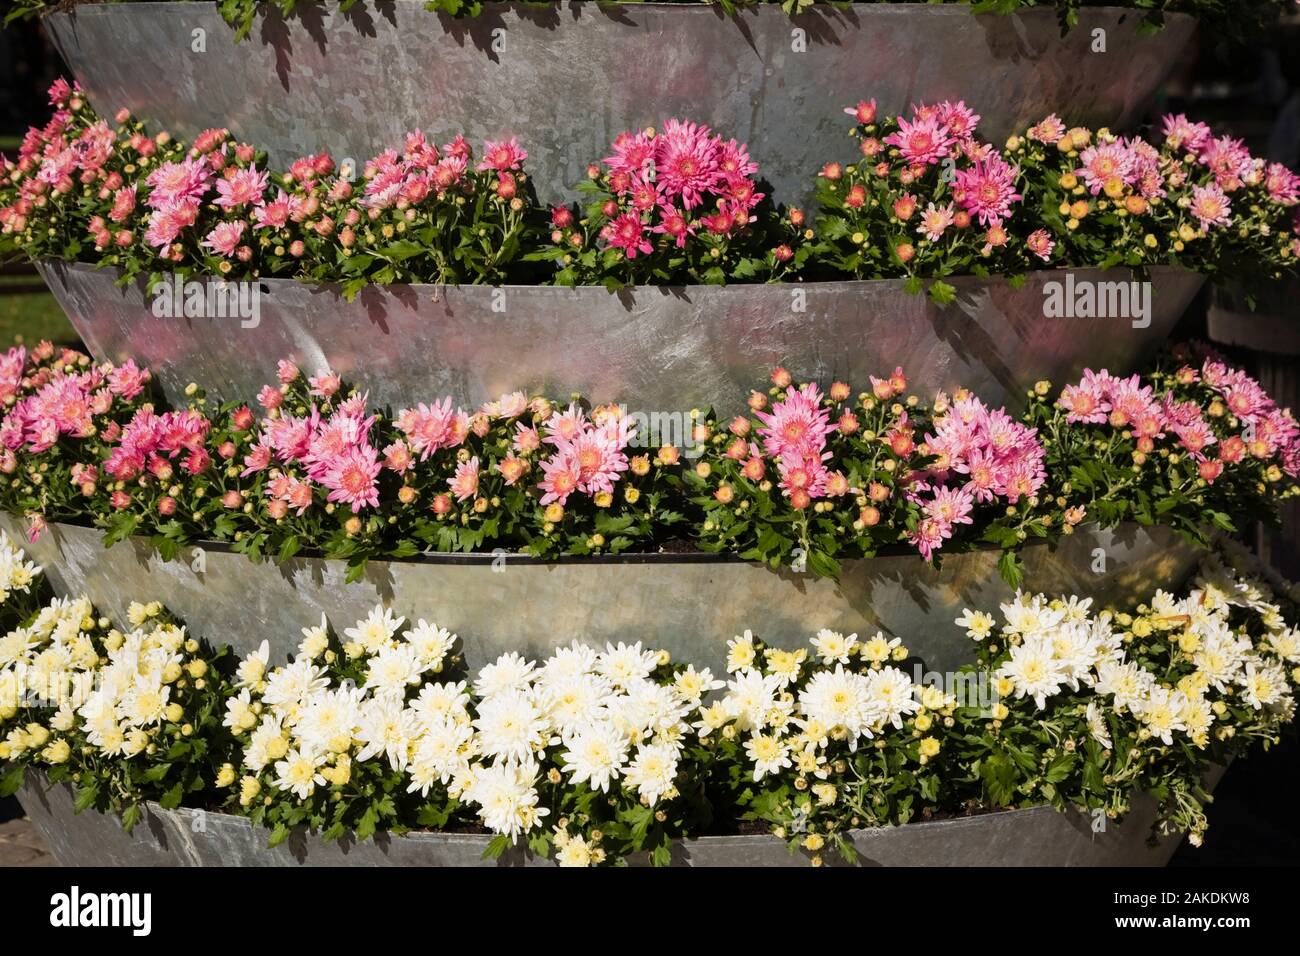 Large metal planter with elevated rows of white, pink and yellow Chrysanthemum flowers in early autumn. Stock Photo